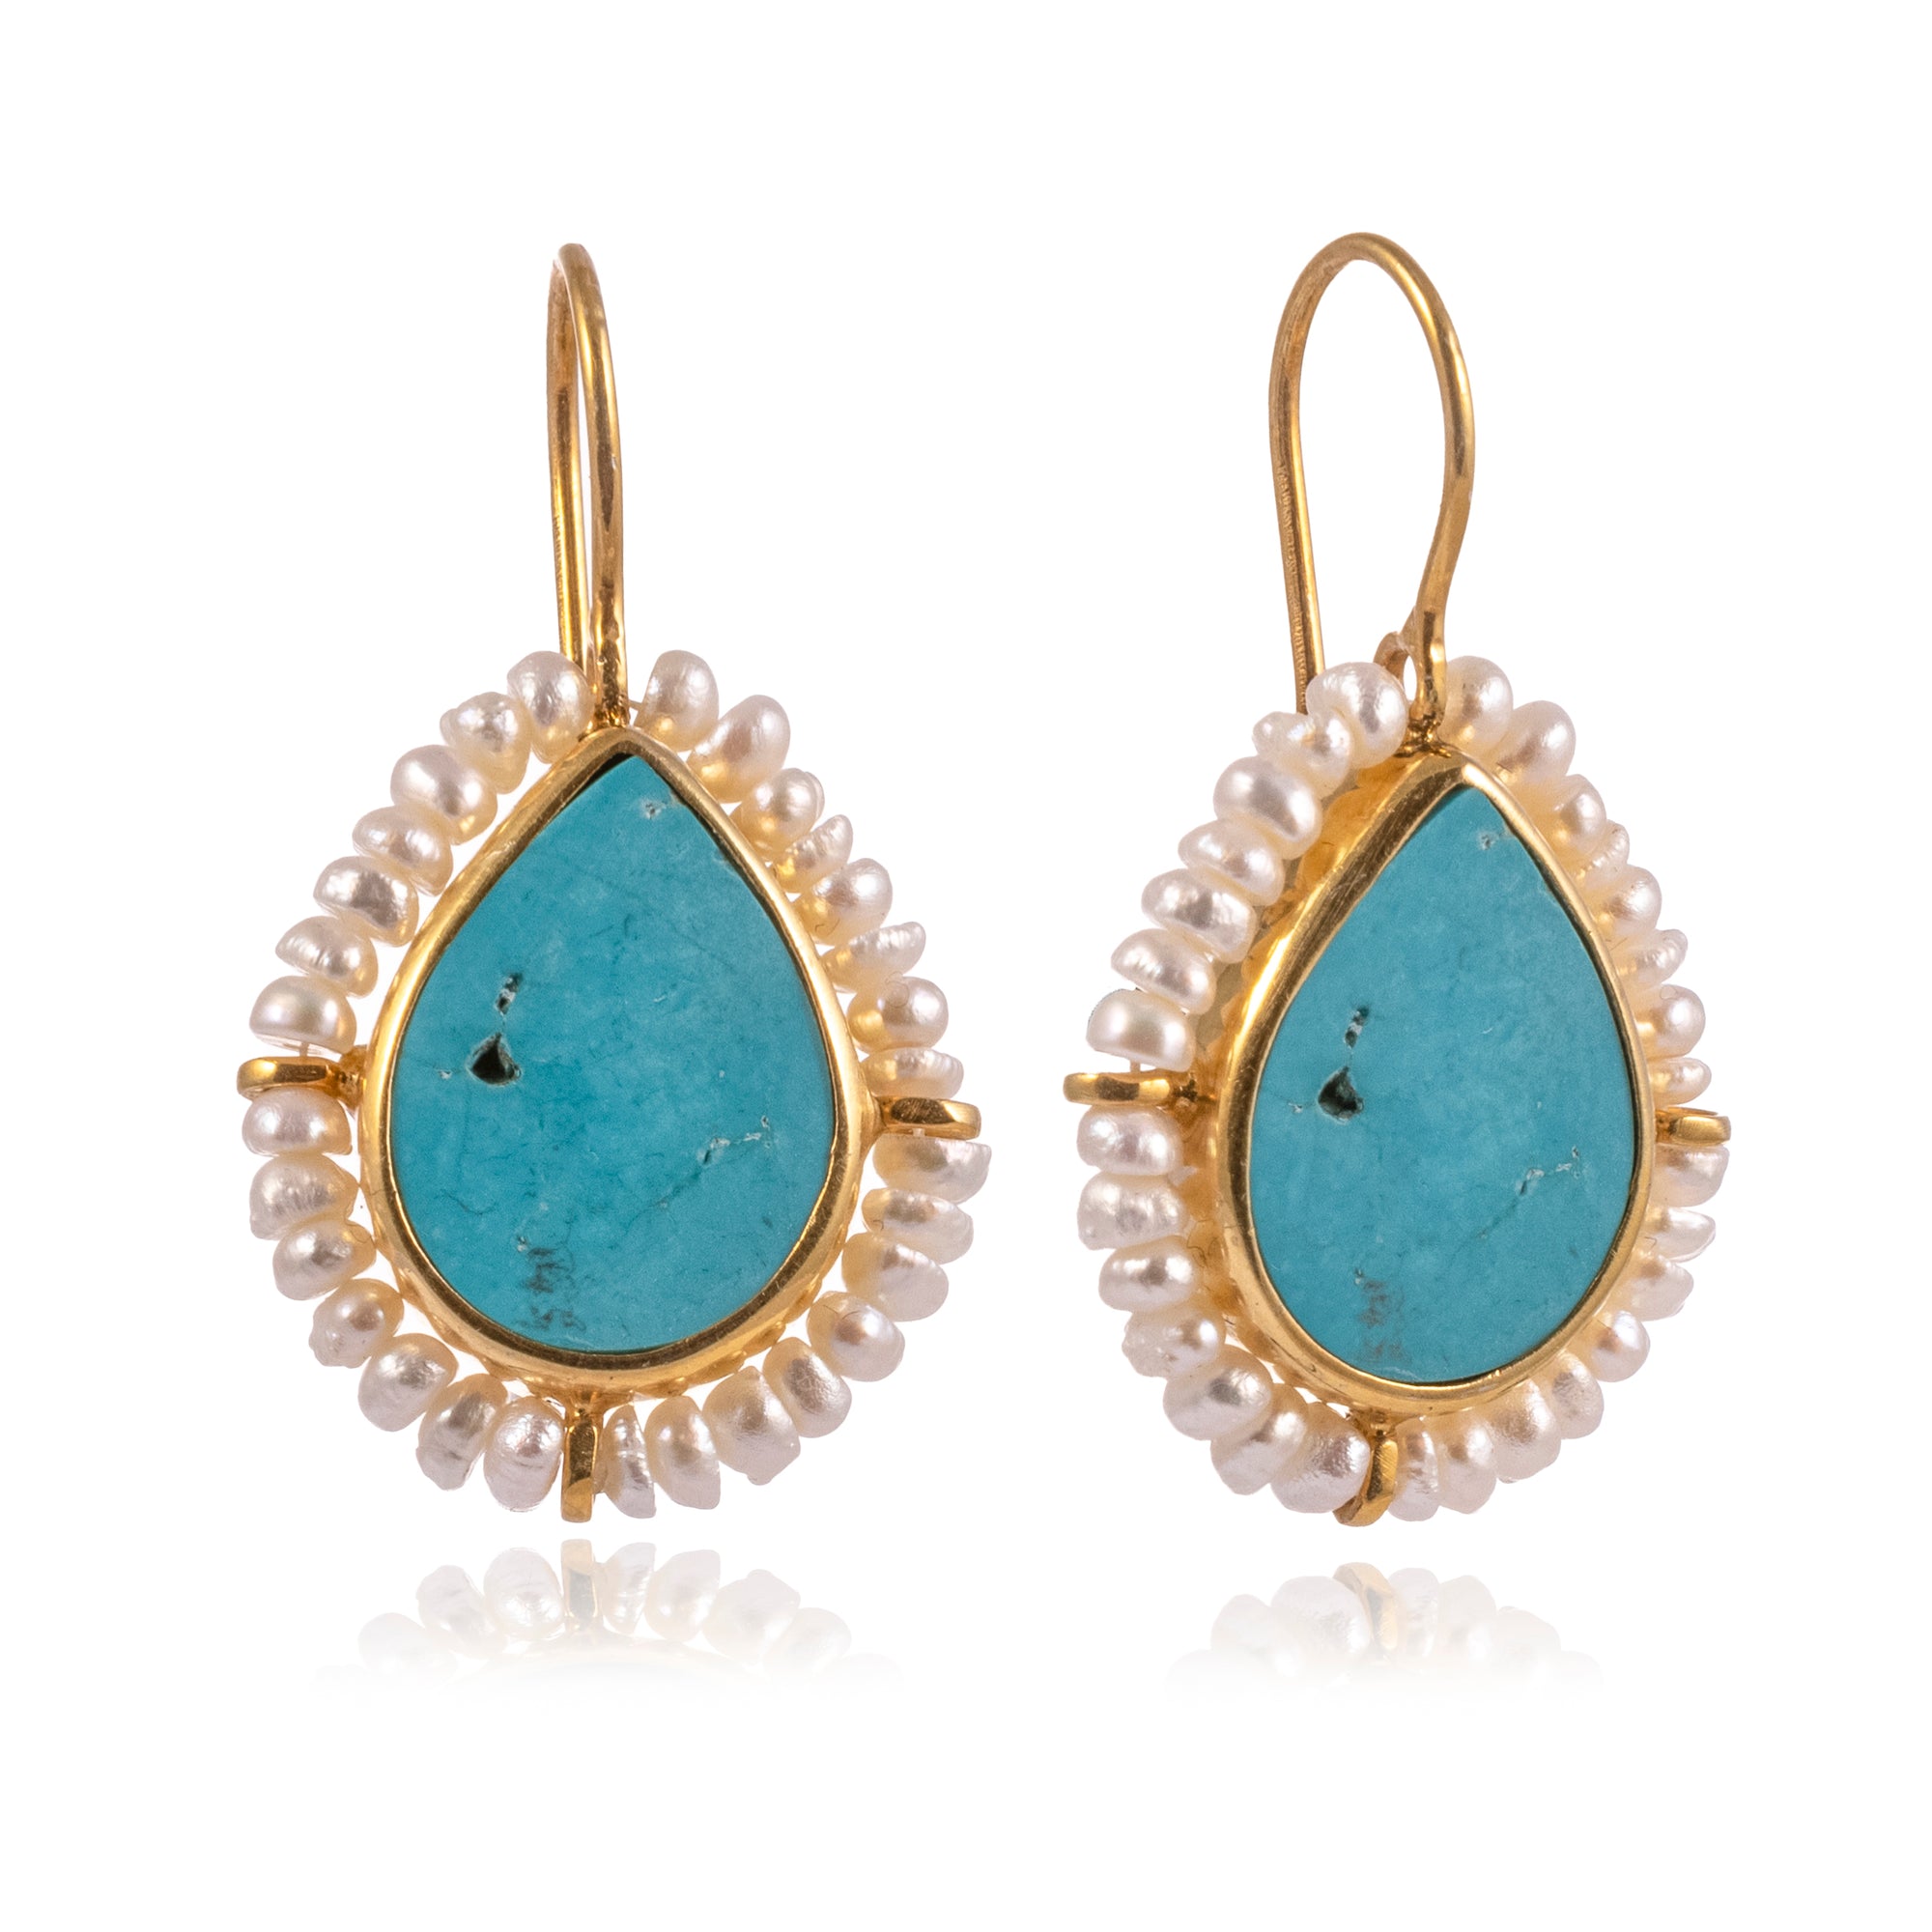 Sarah Stretton Jewellery - ANAIS EARRINGS in Turquoise